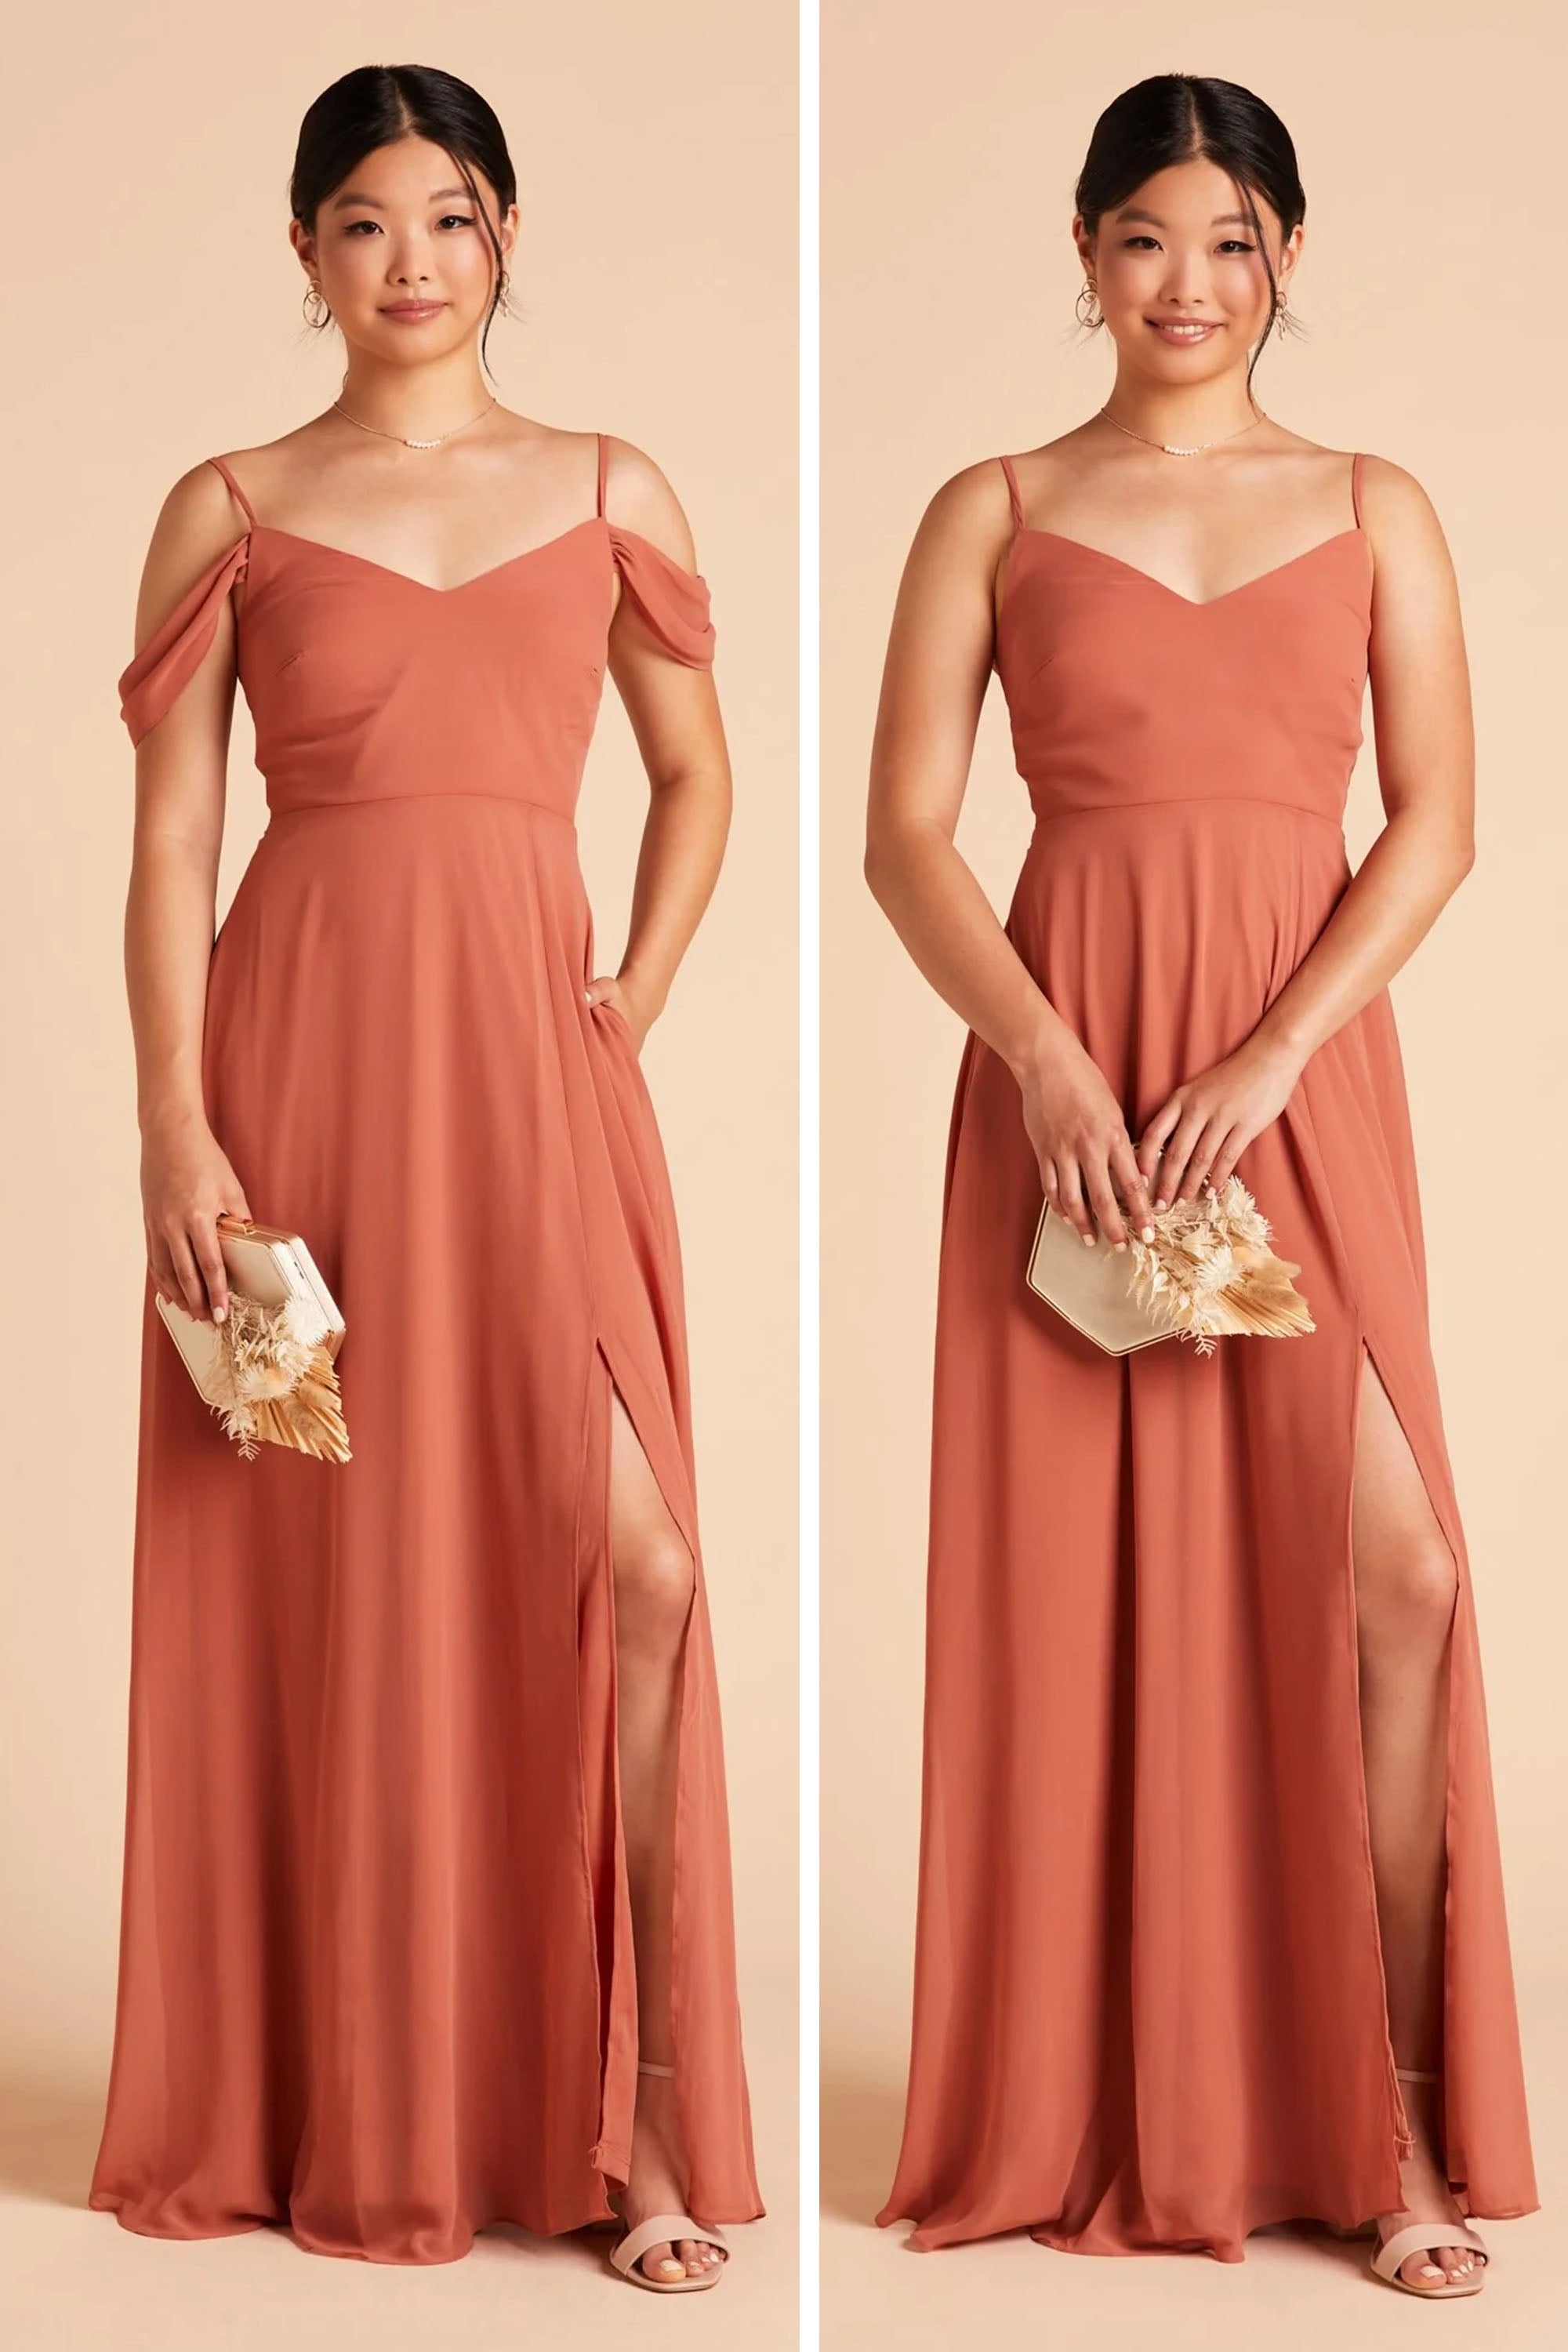 Champagne Devin Convertible Dress by Birdy Grey